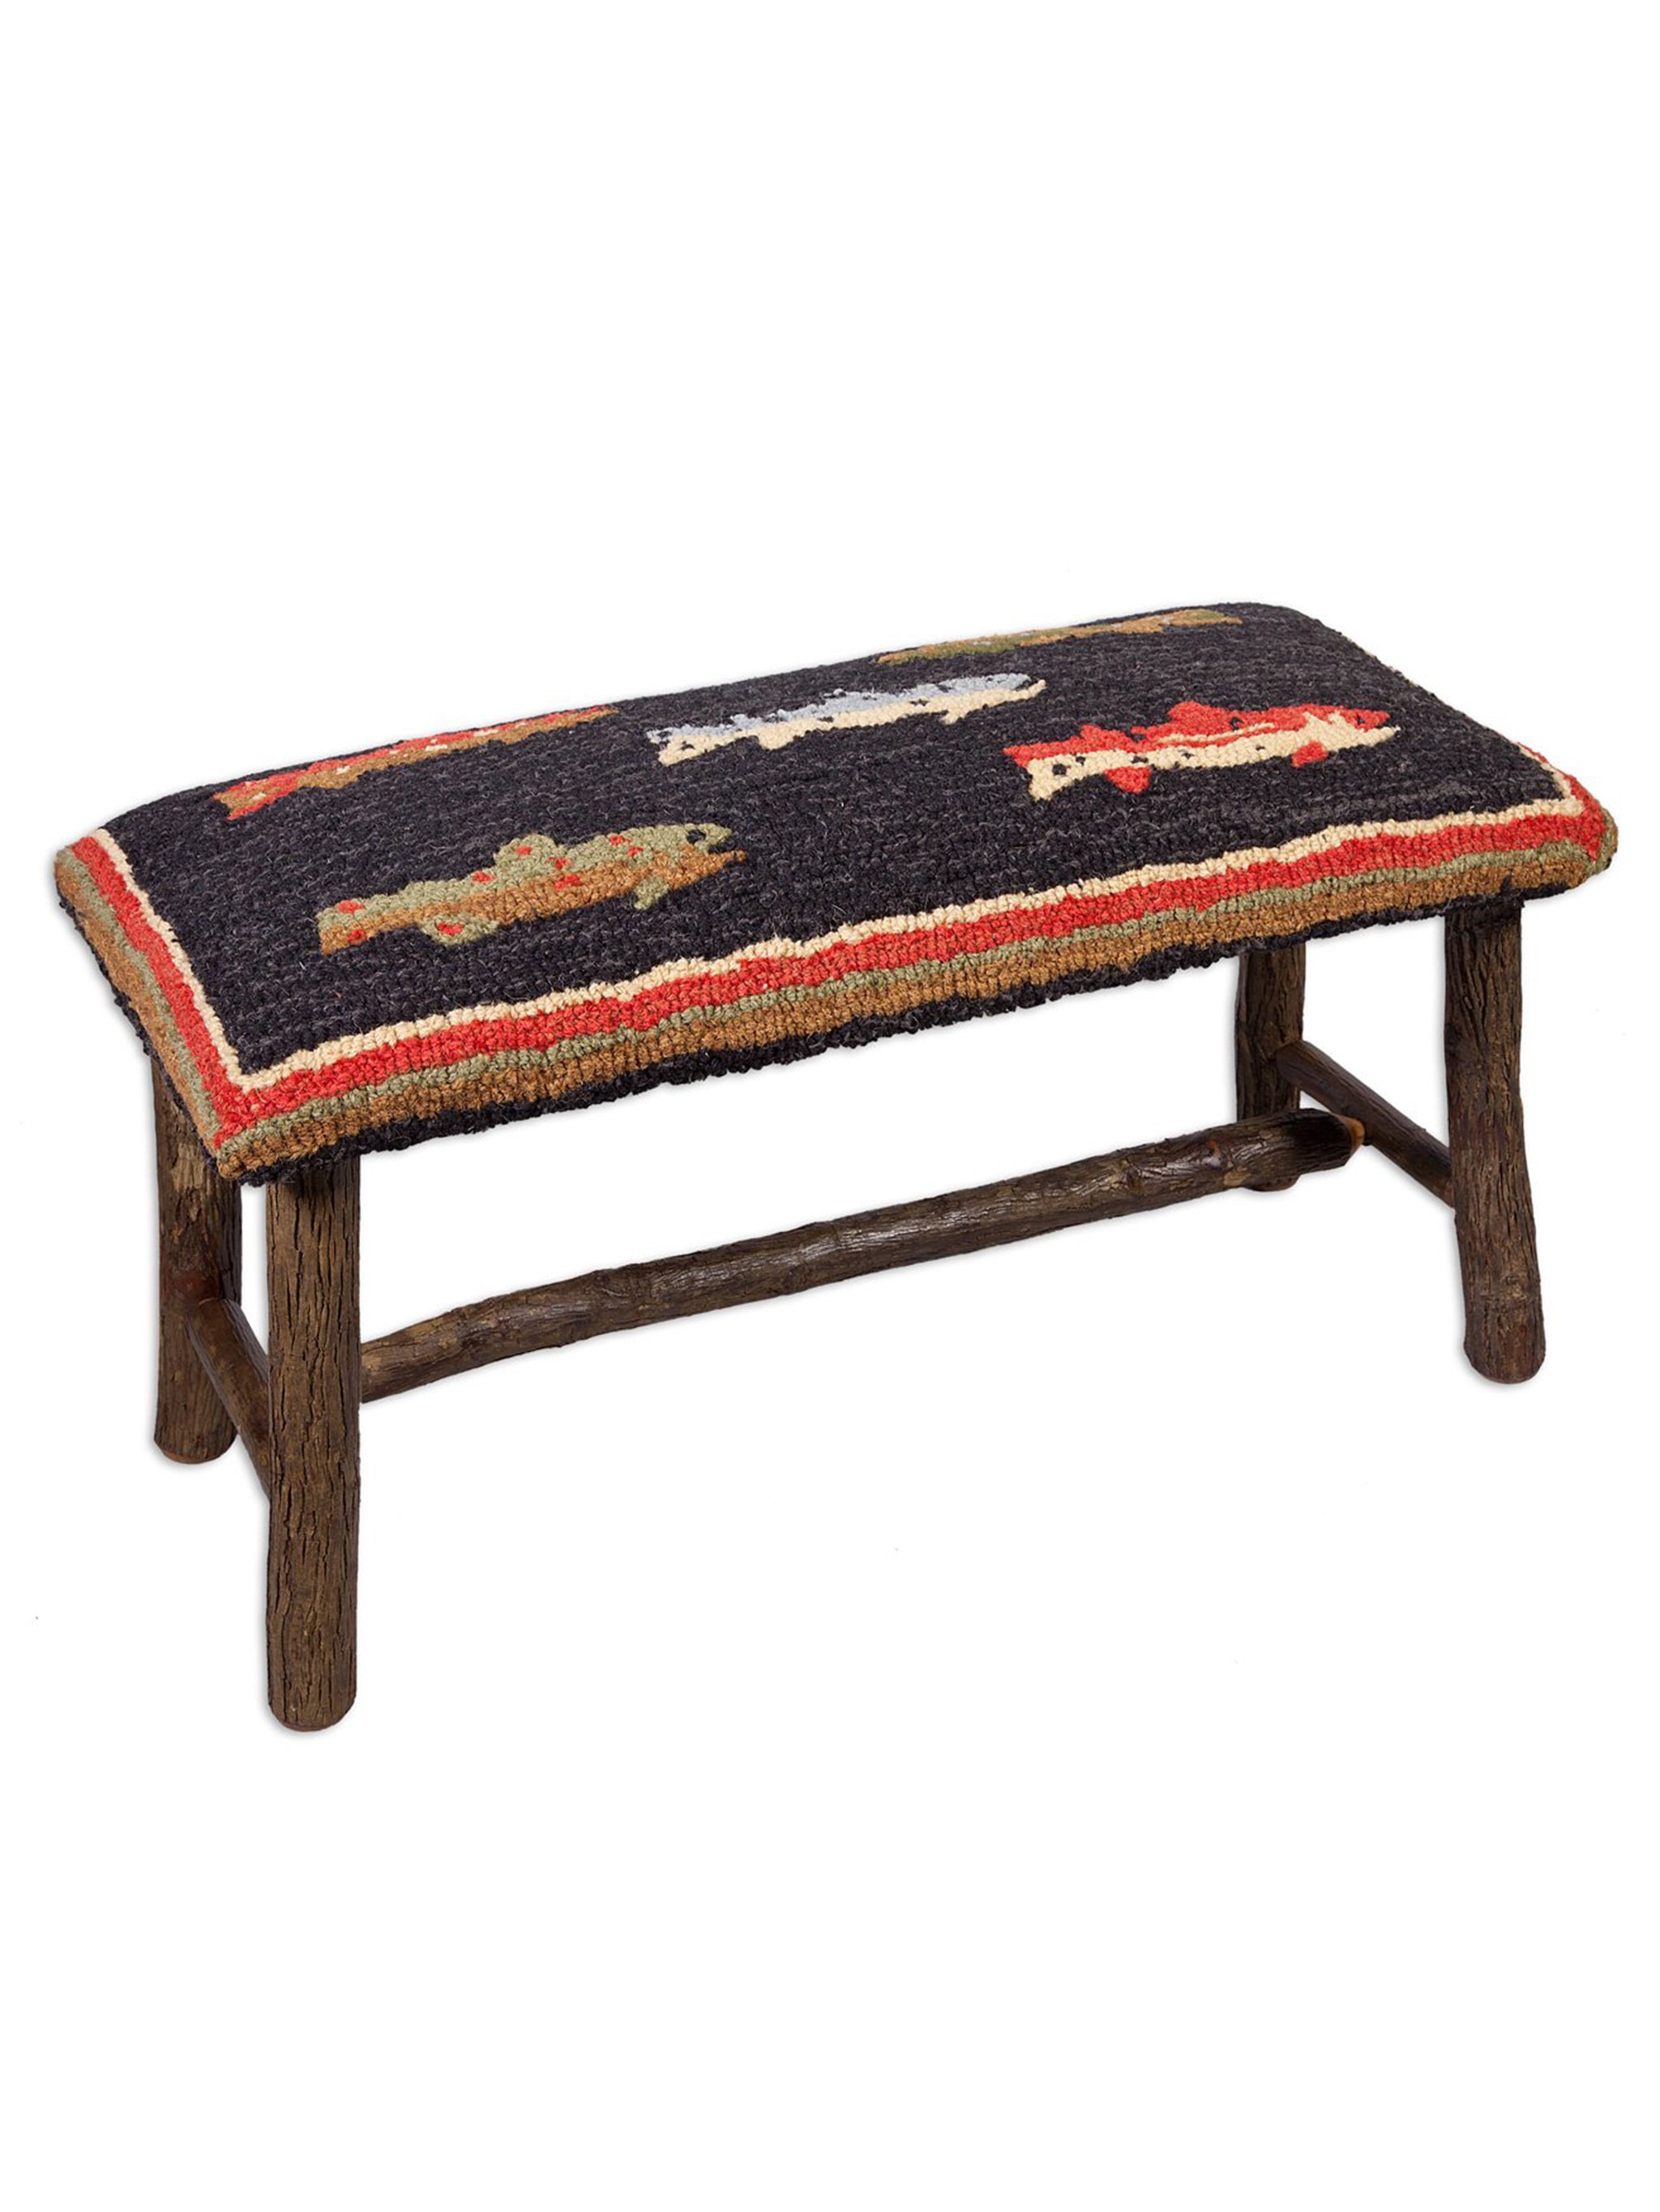 River Fish Hooked Wool Top Bench